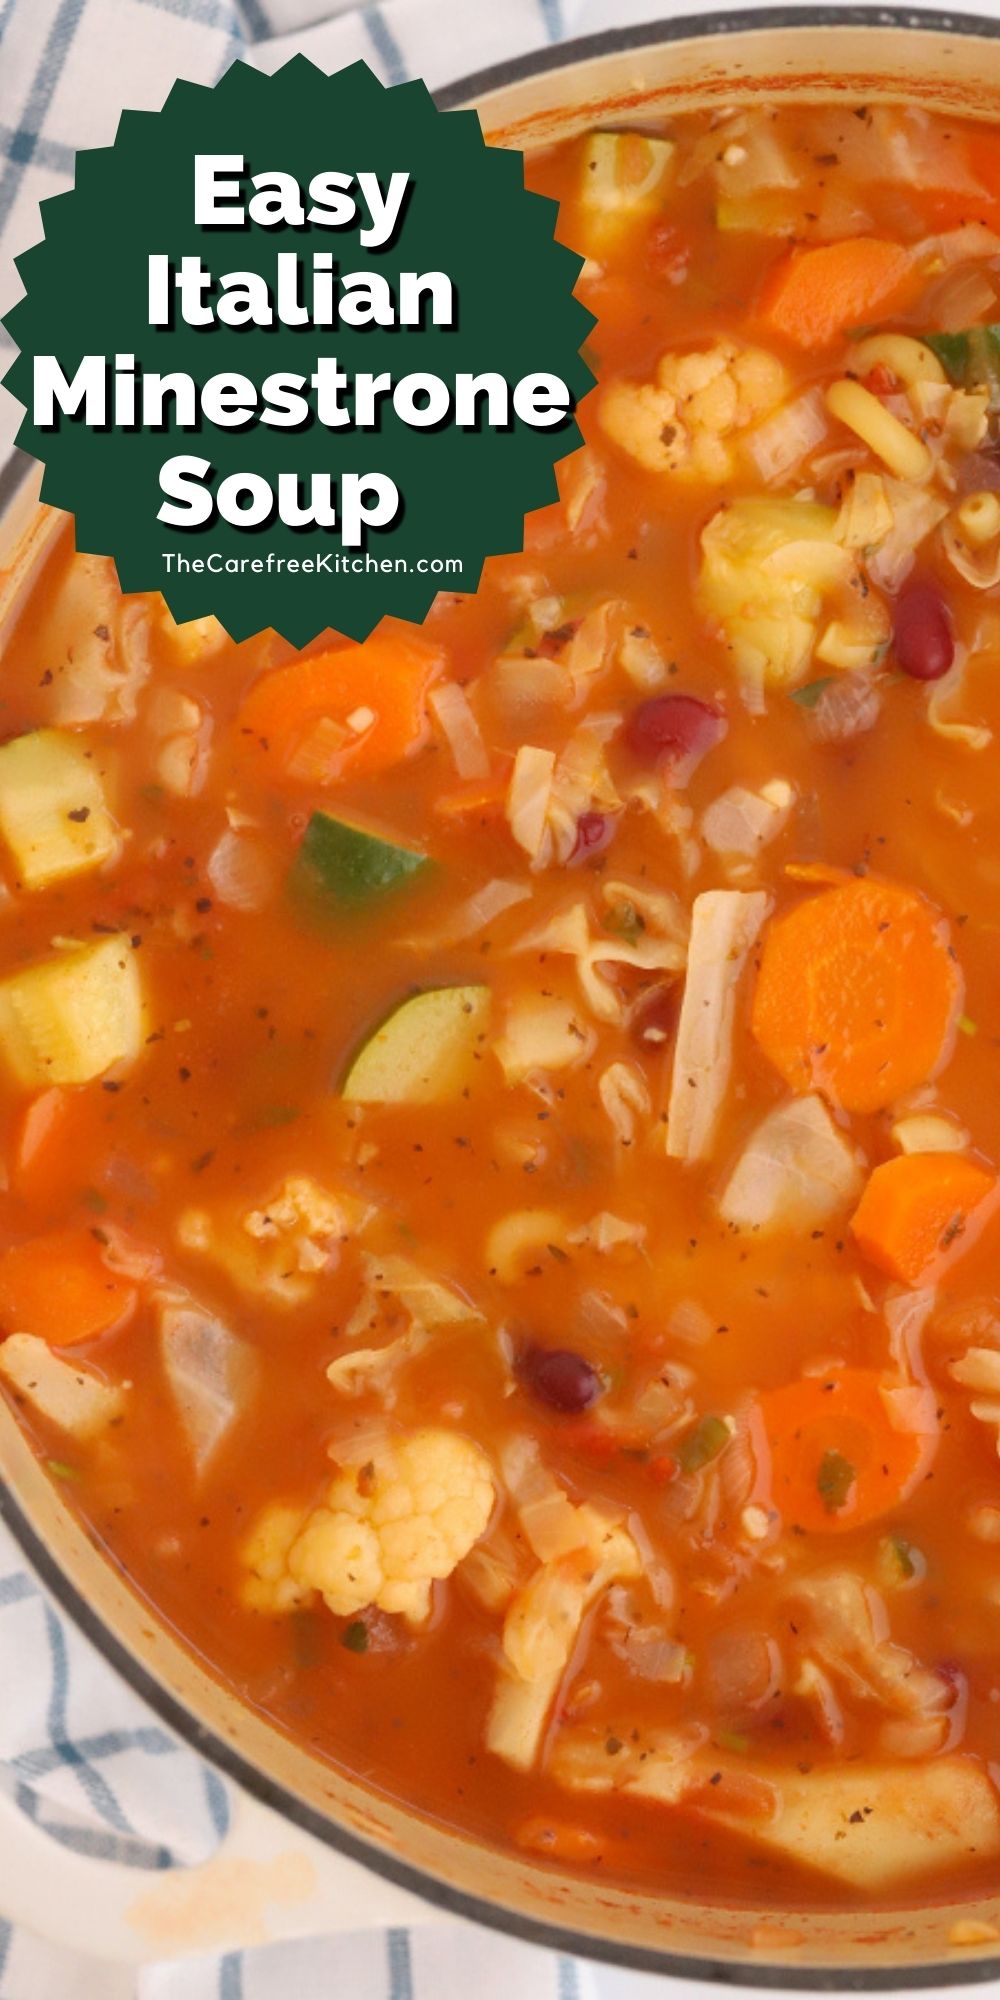 Best Minestrone Soup - The Carefree Kitchen